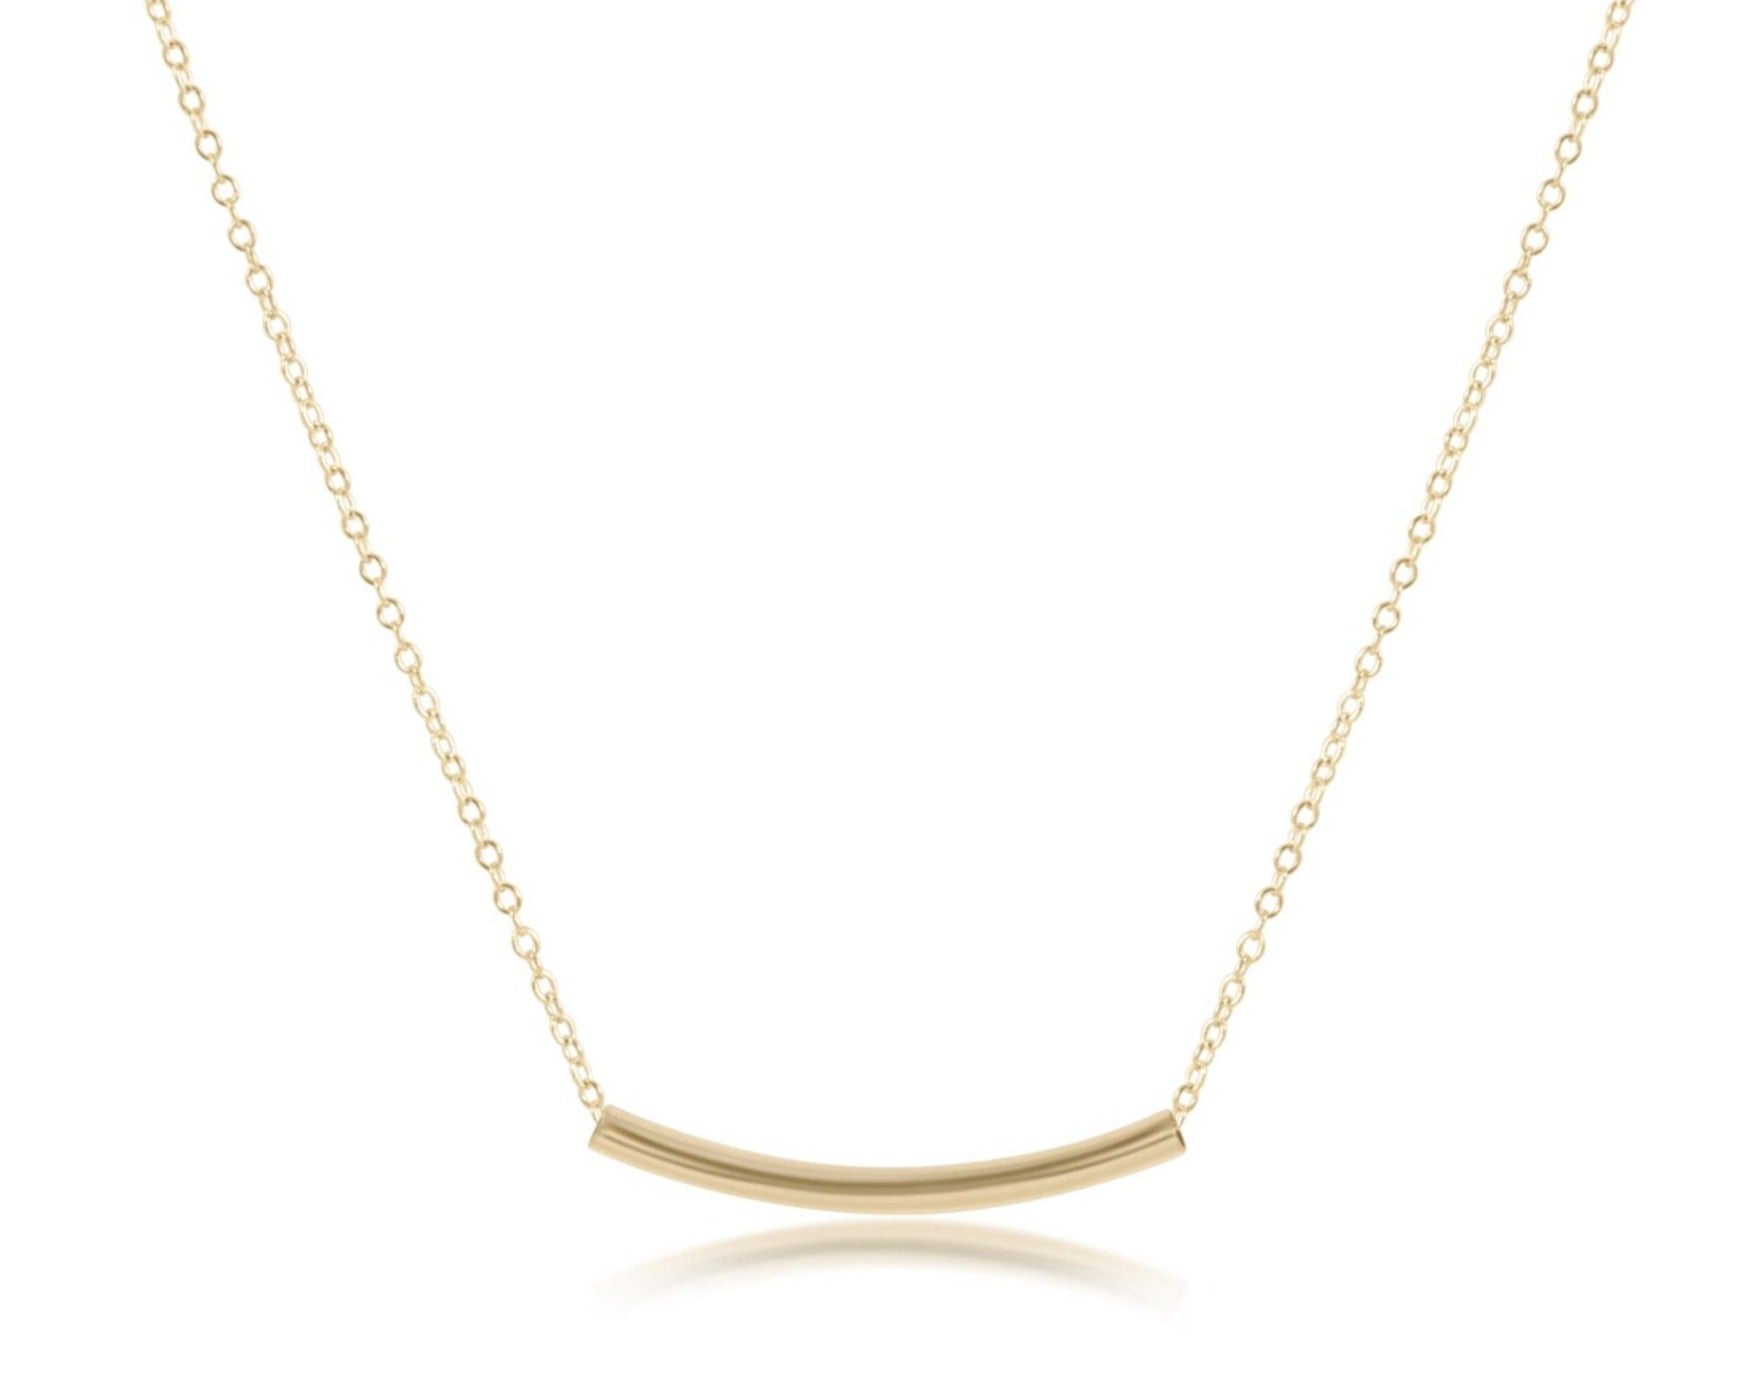 16" Necklace Gold - Bliss Bar Small Gold